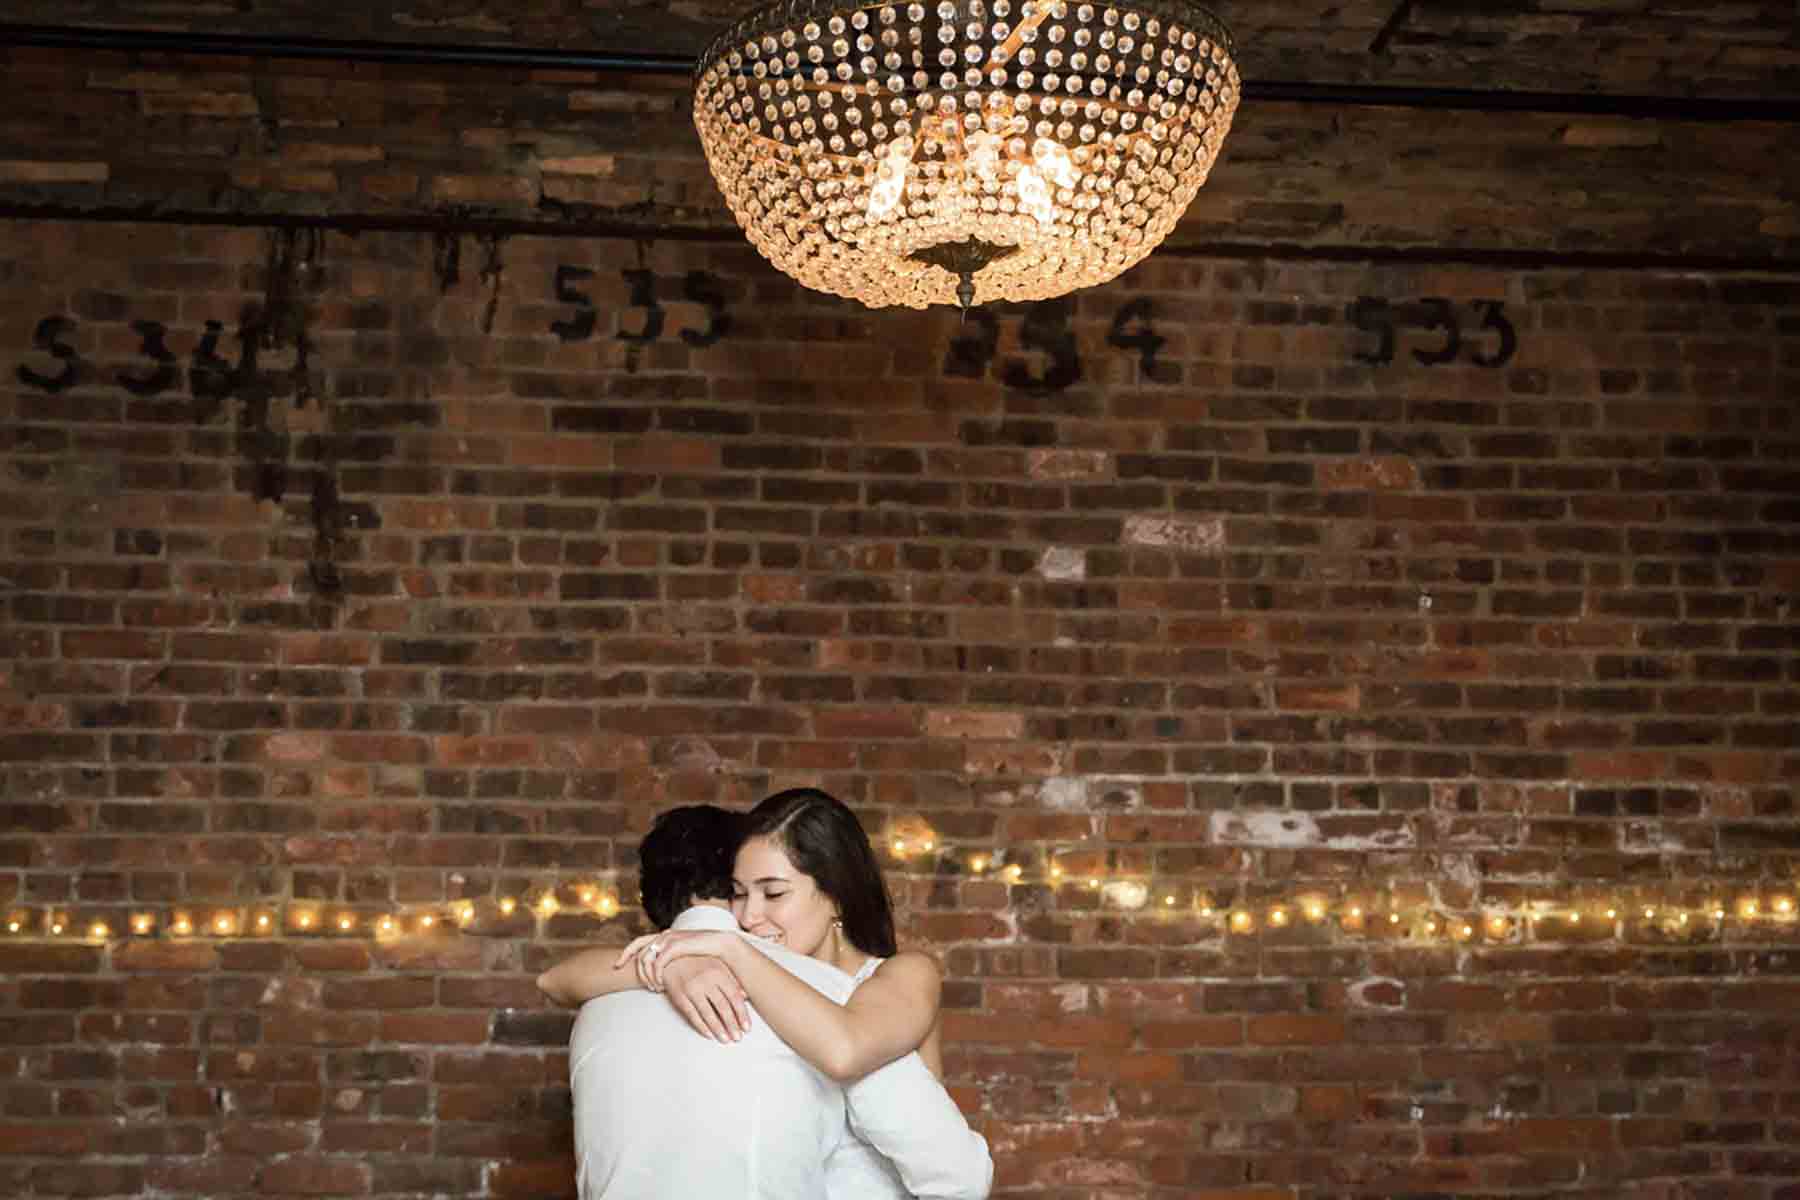 Bride and groom dancing under chandelier in front of brick wall for an article on how to save money on wedding photography